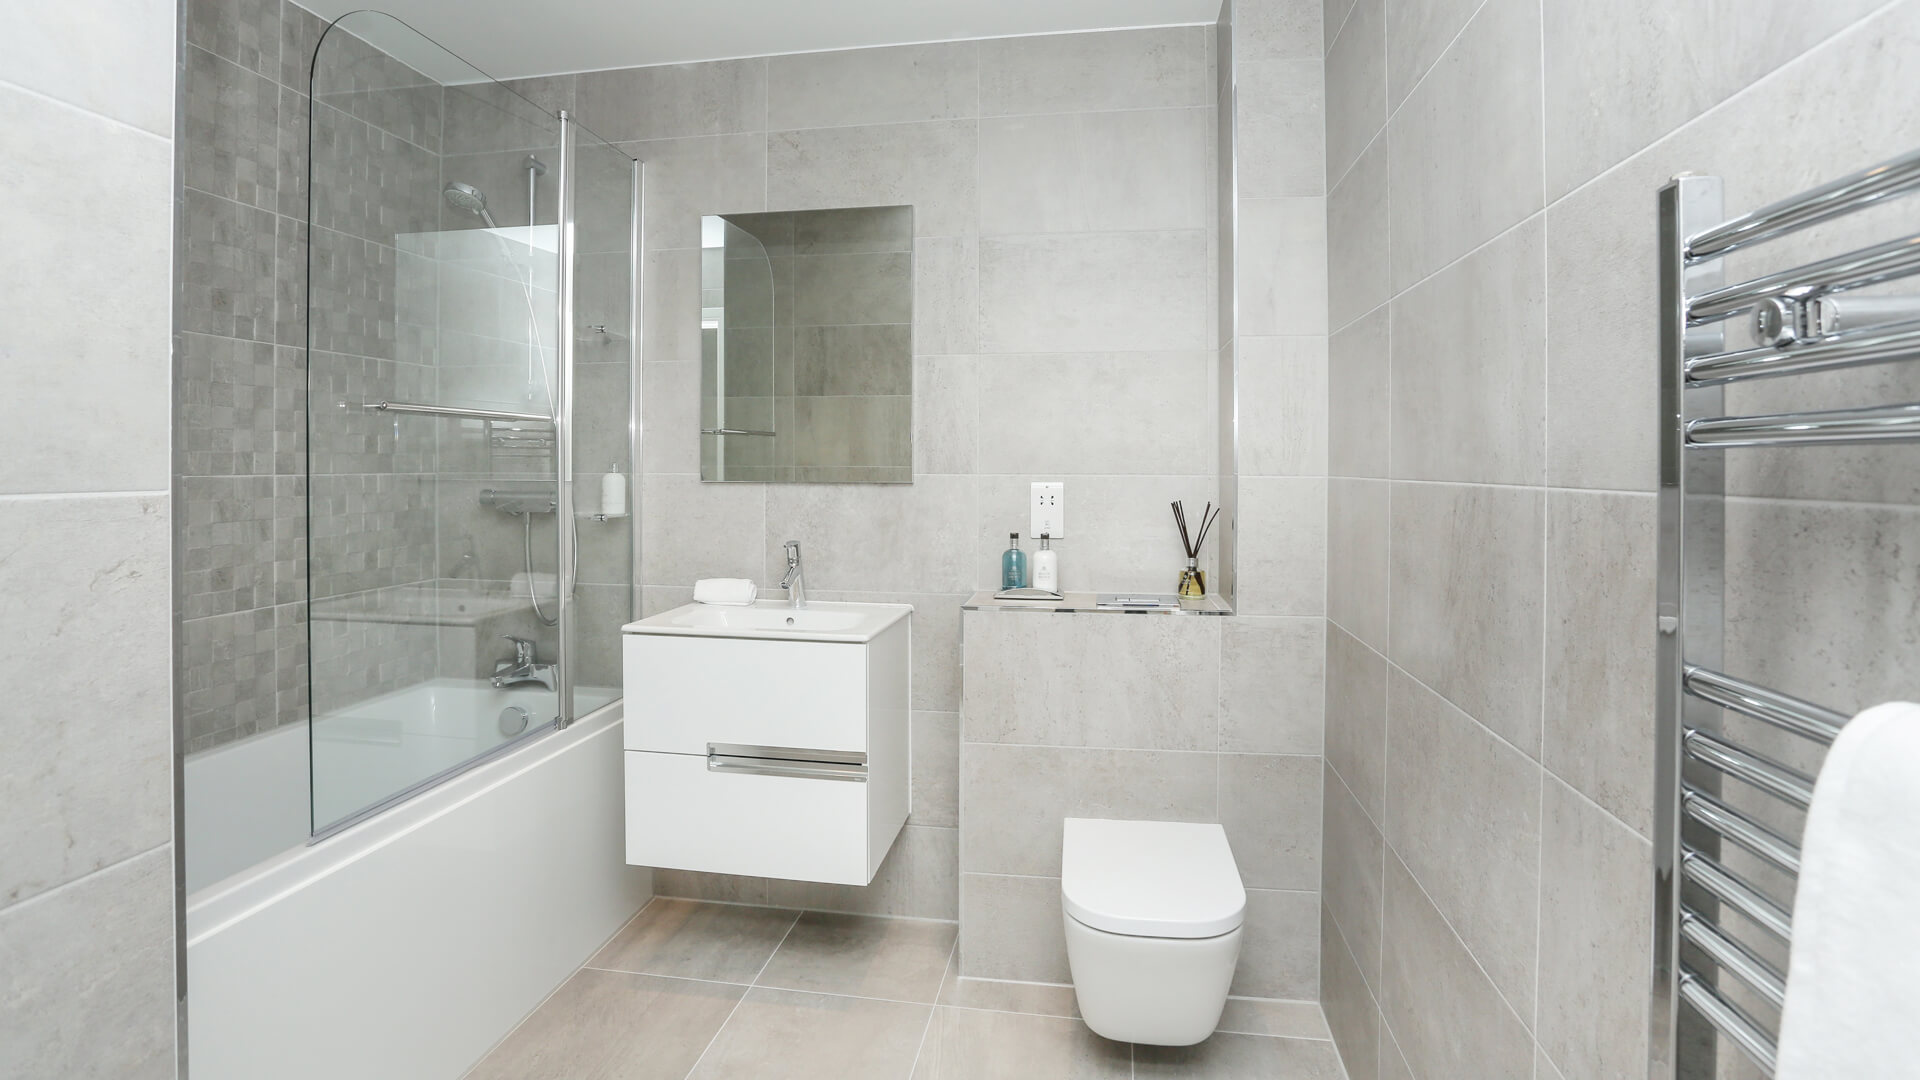 Bathroom with grey tiling, white toilet, mirror and sink